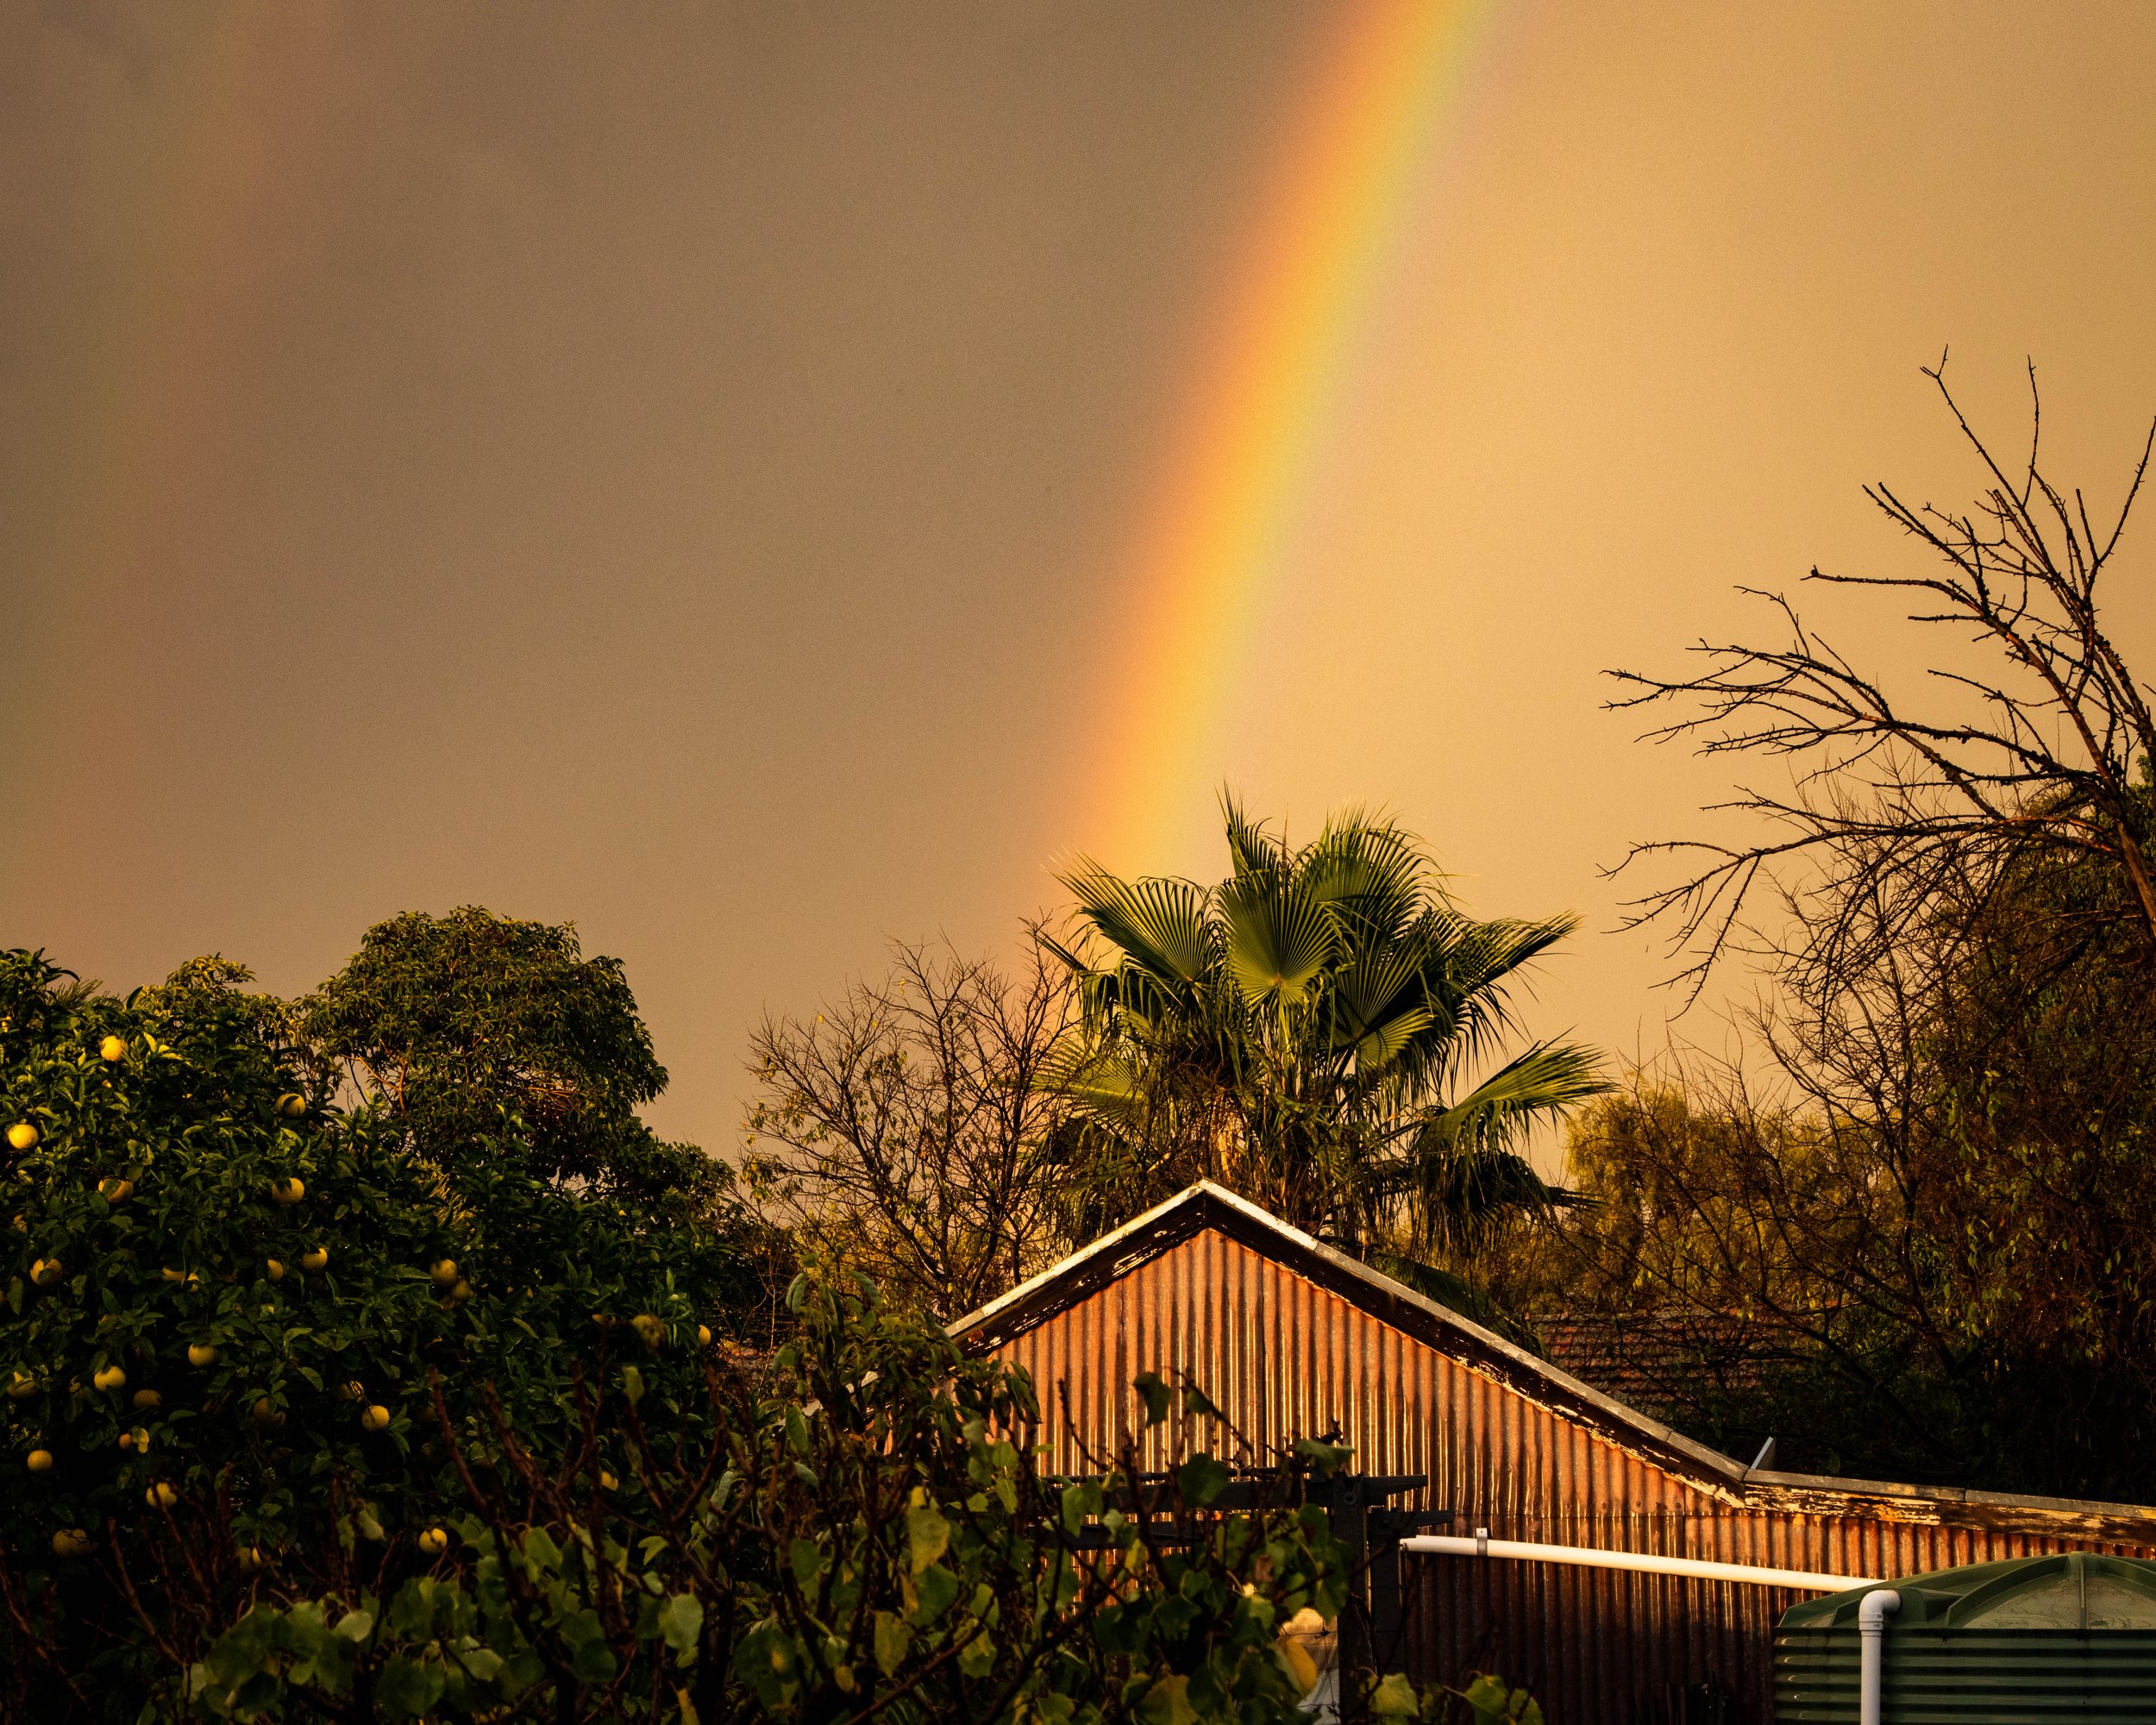 Rainbow after the storm